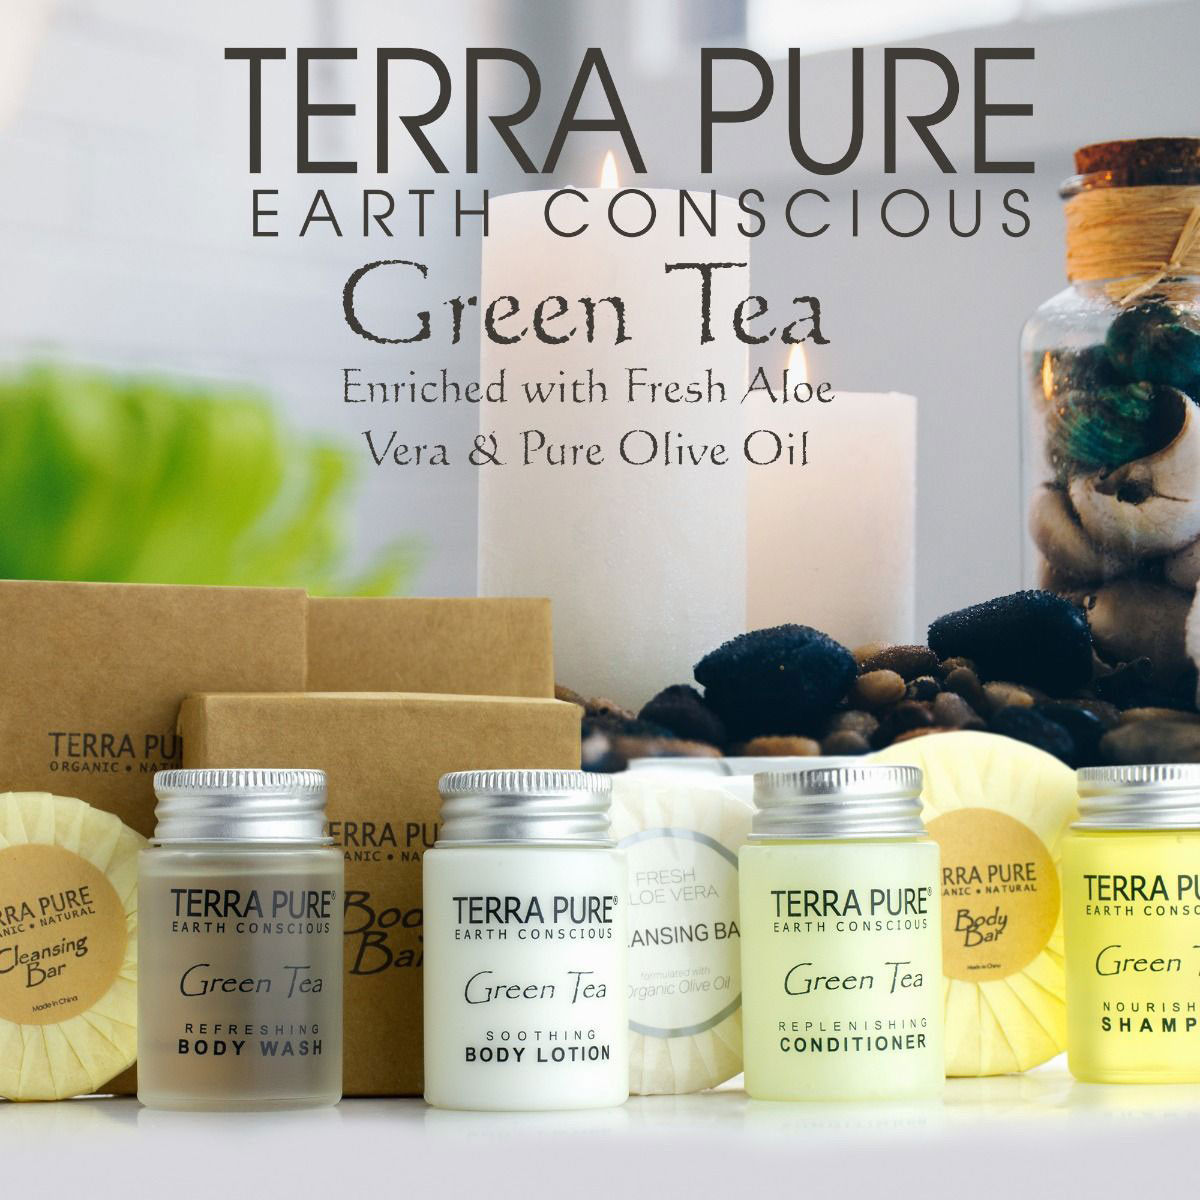 From where does the TERRA PURE GREEN TEA Collection ship?